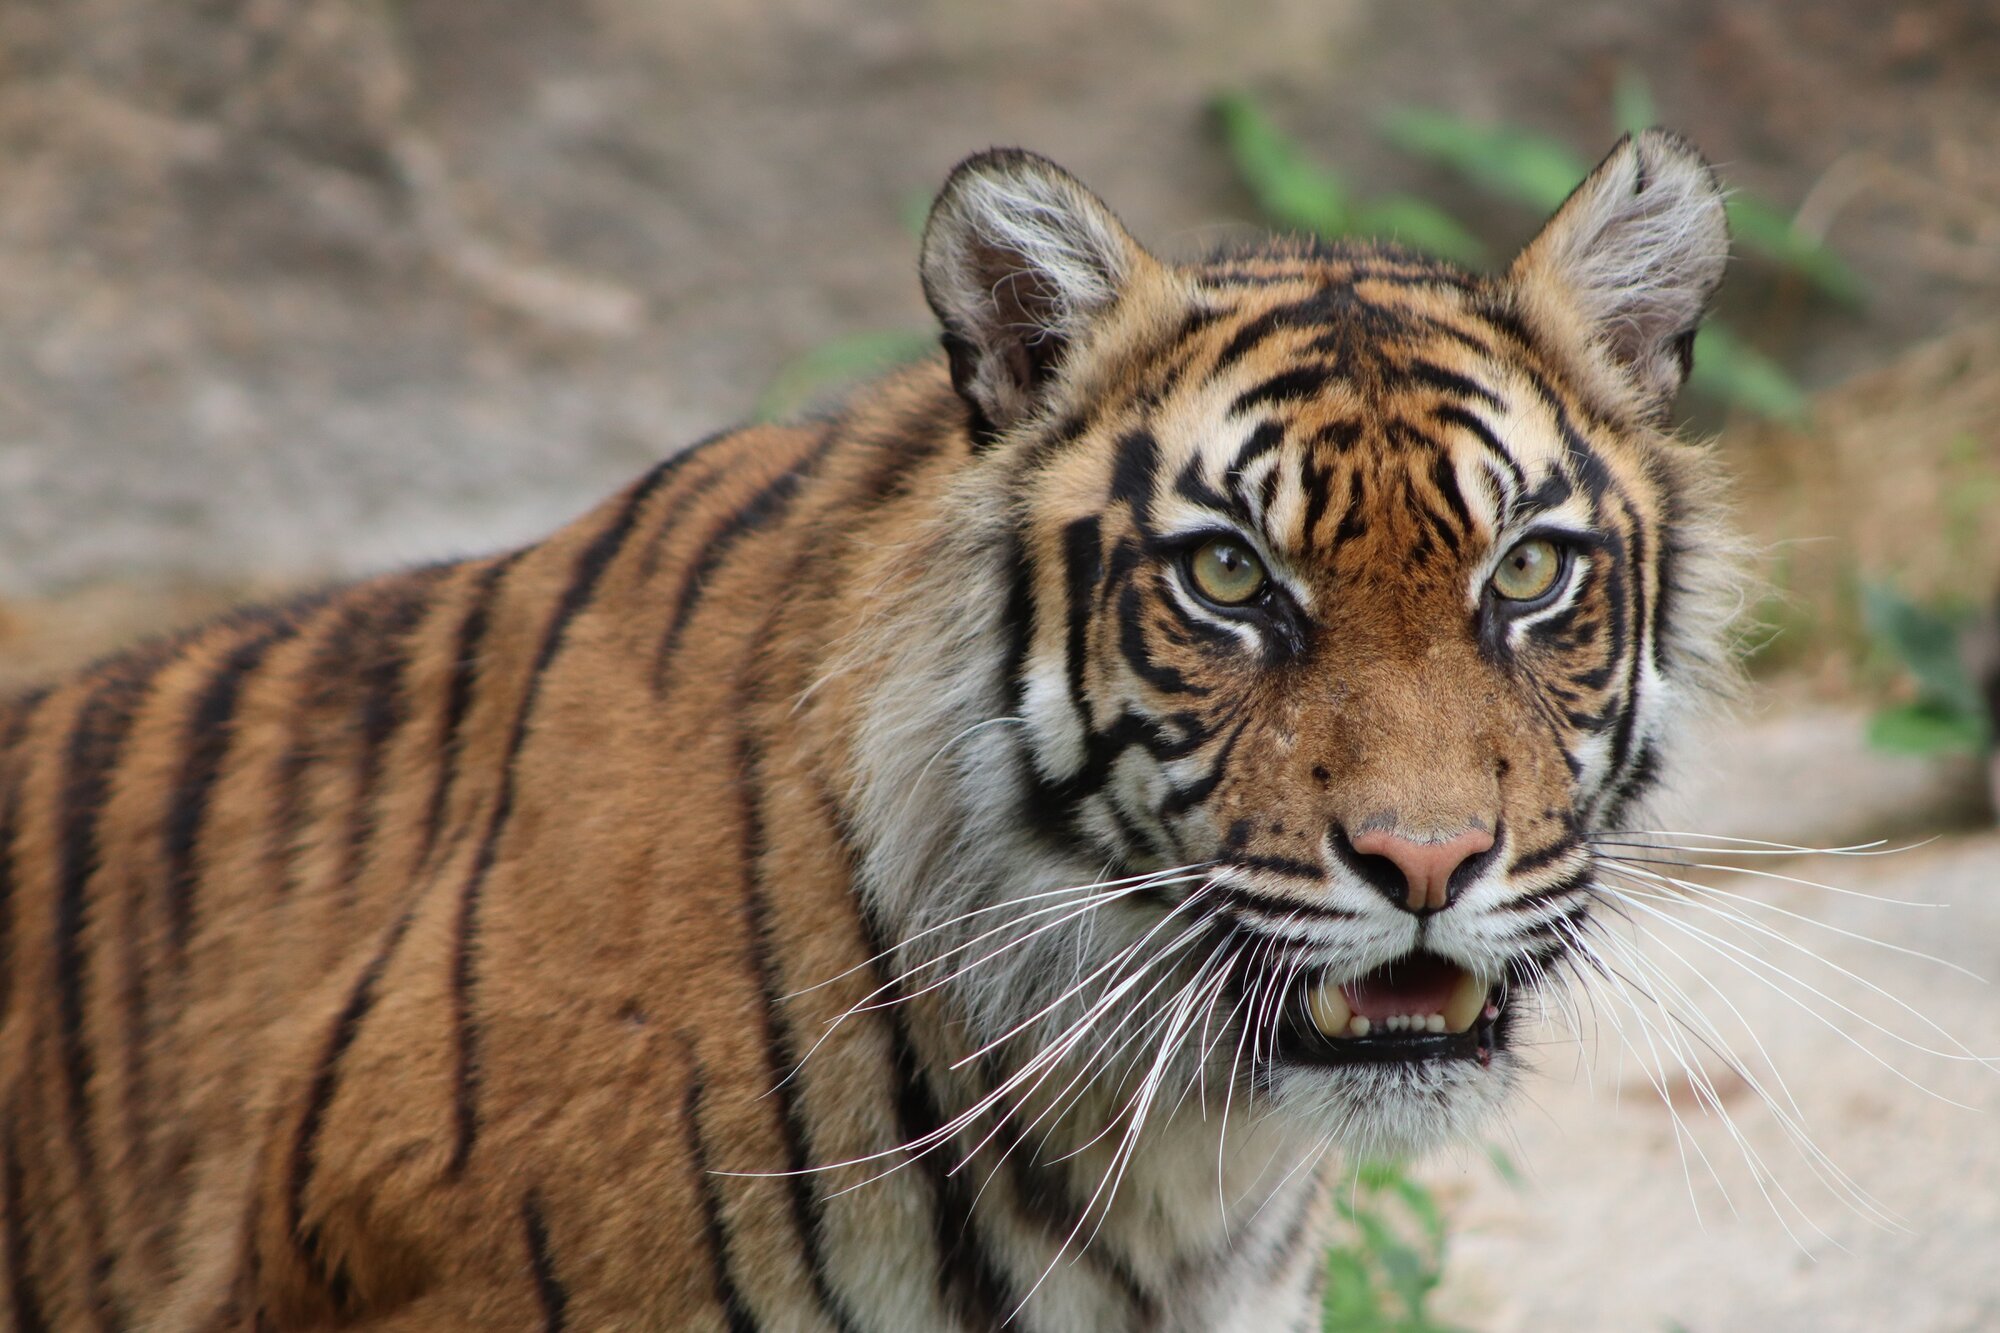 30 interesting facts about Tigers